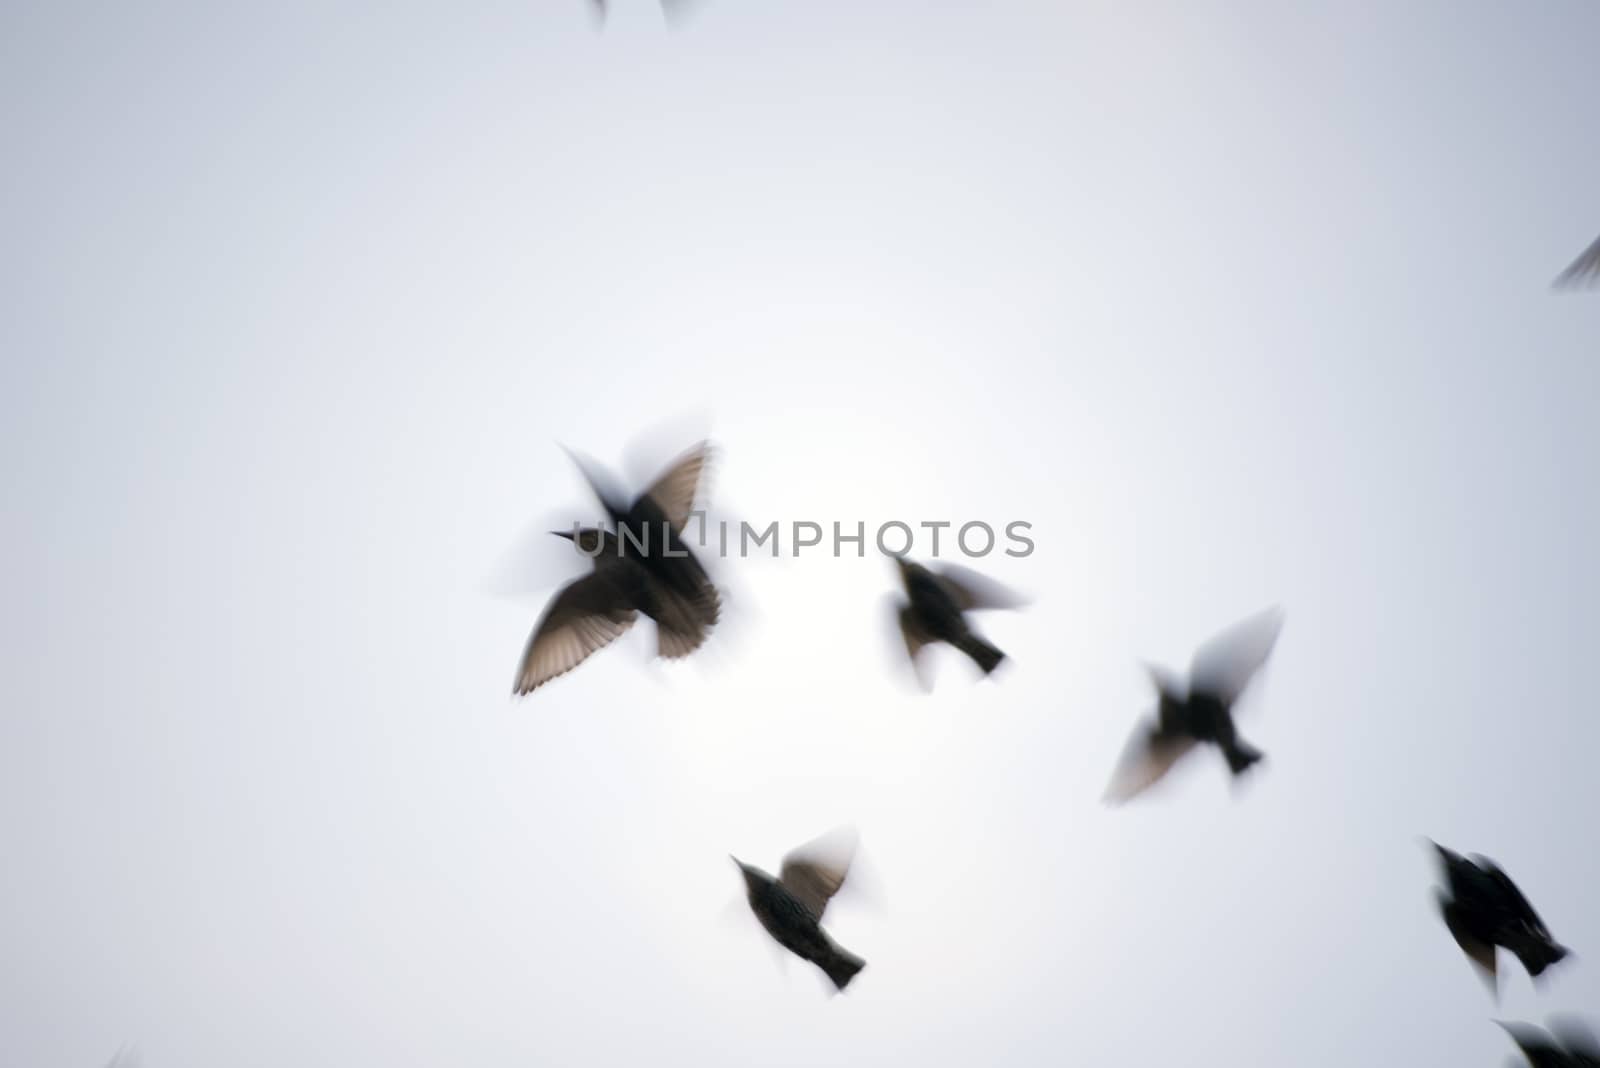 starlings in blurred motion by morrbyte